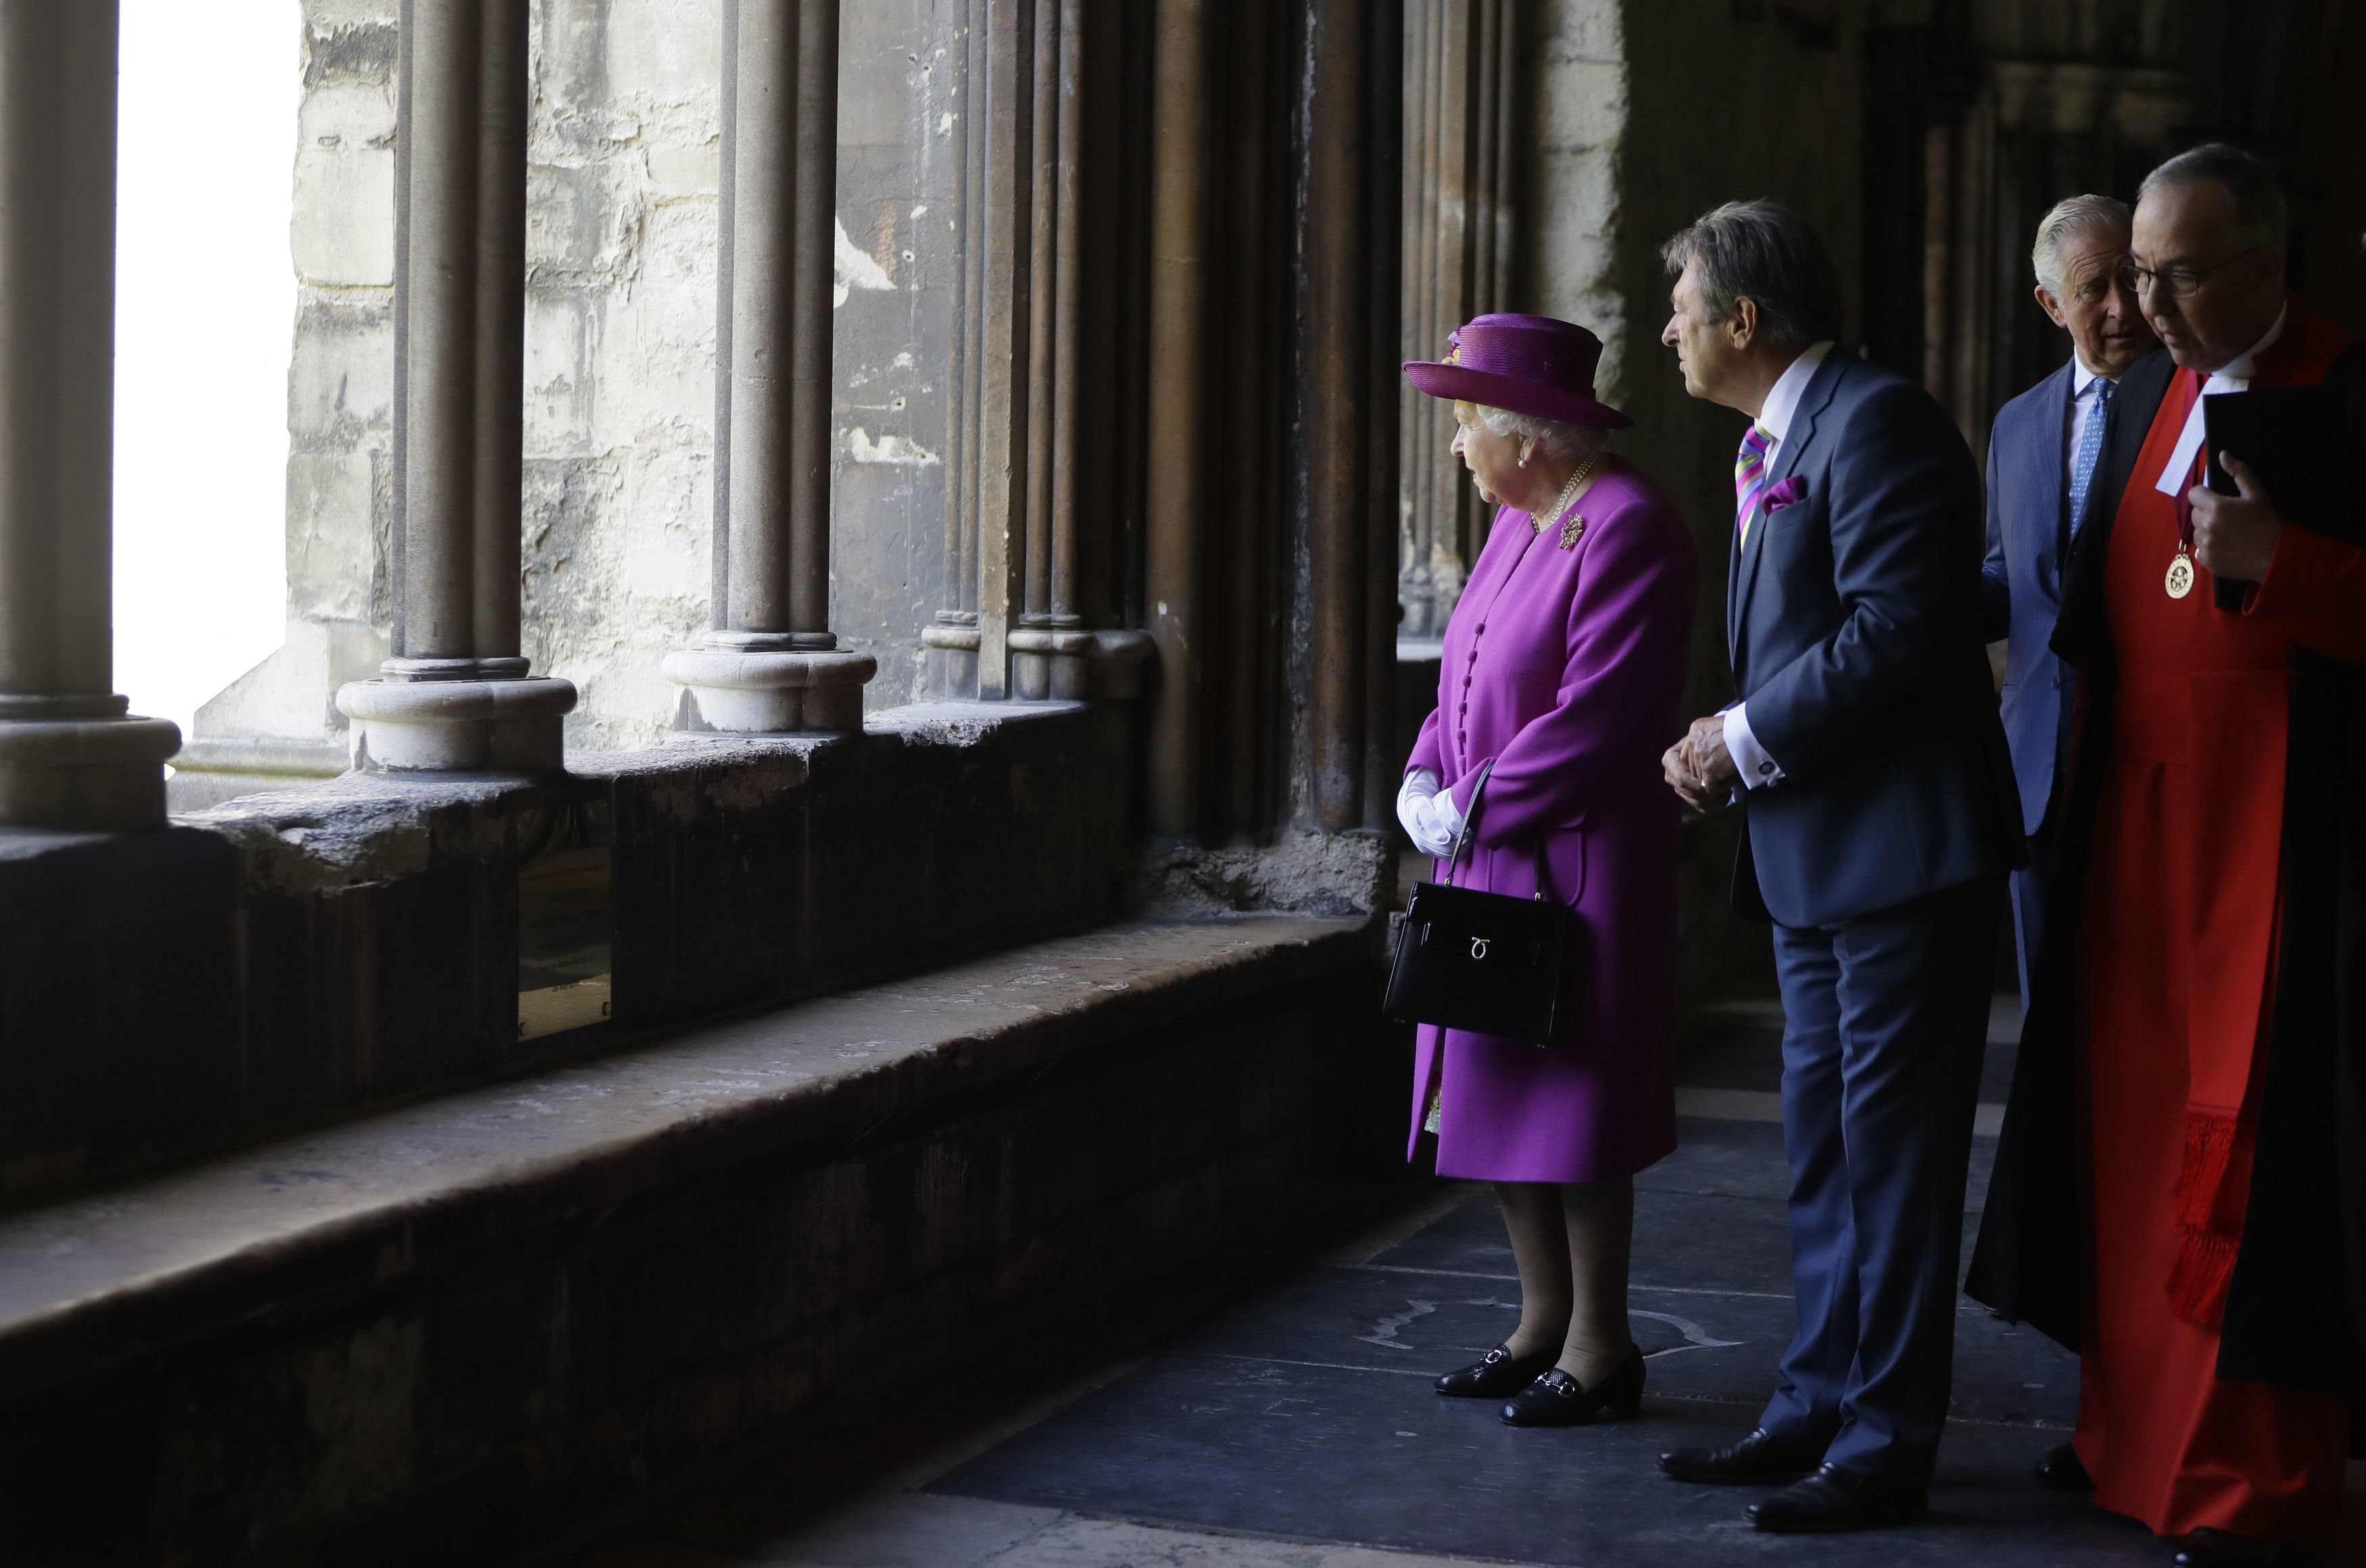 The Queen with Alan Titchmarsh after opening the Queen's Diamond Jubilee Galleries at Westminster Abbey